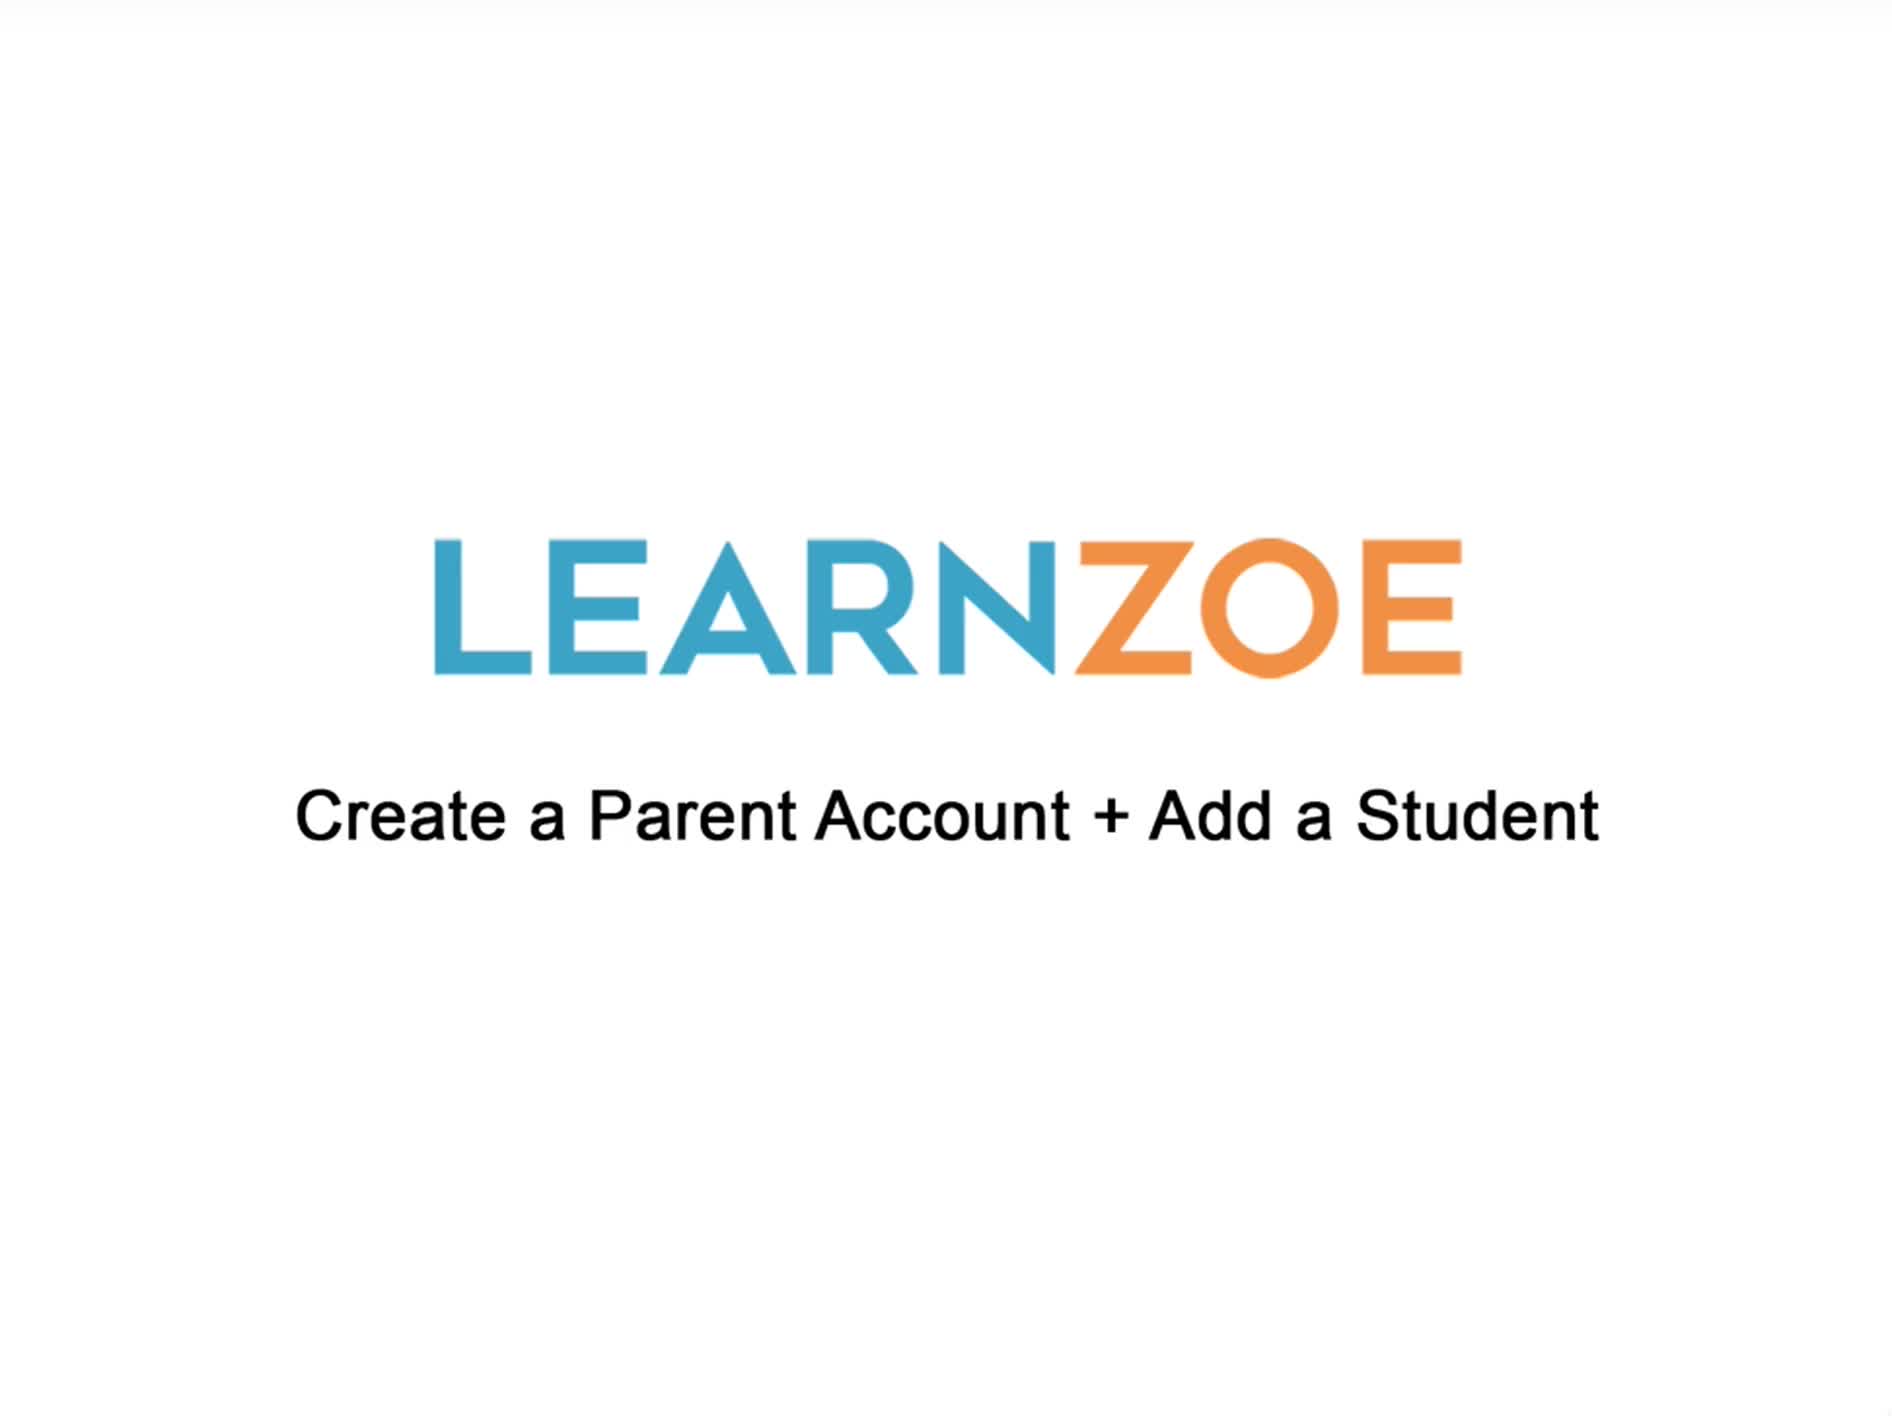 Create a Parent Account<br> and Add a Student Video Thumbnail